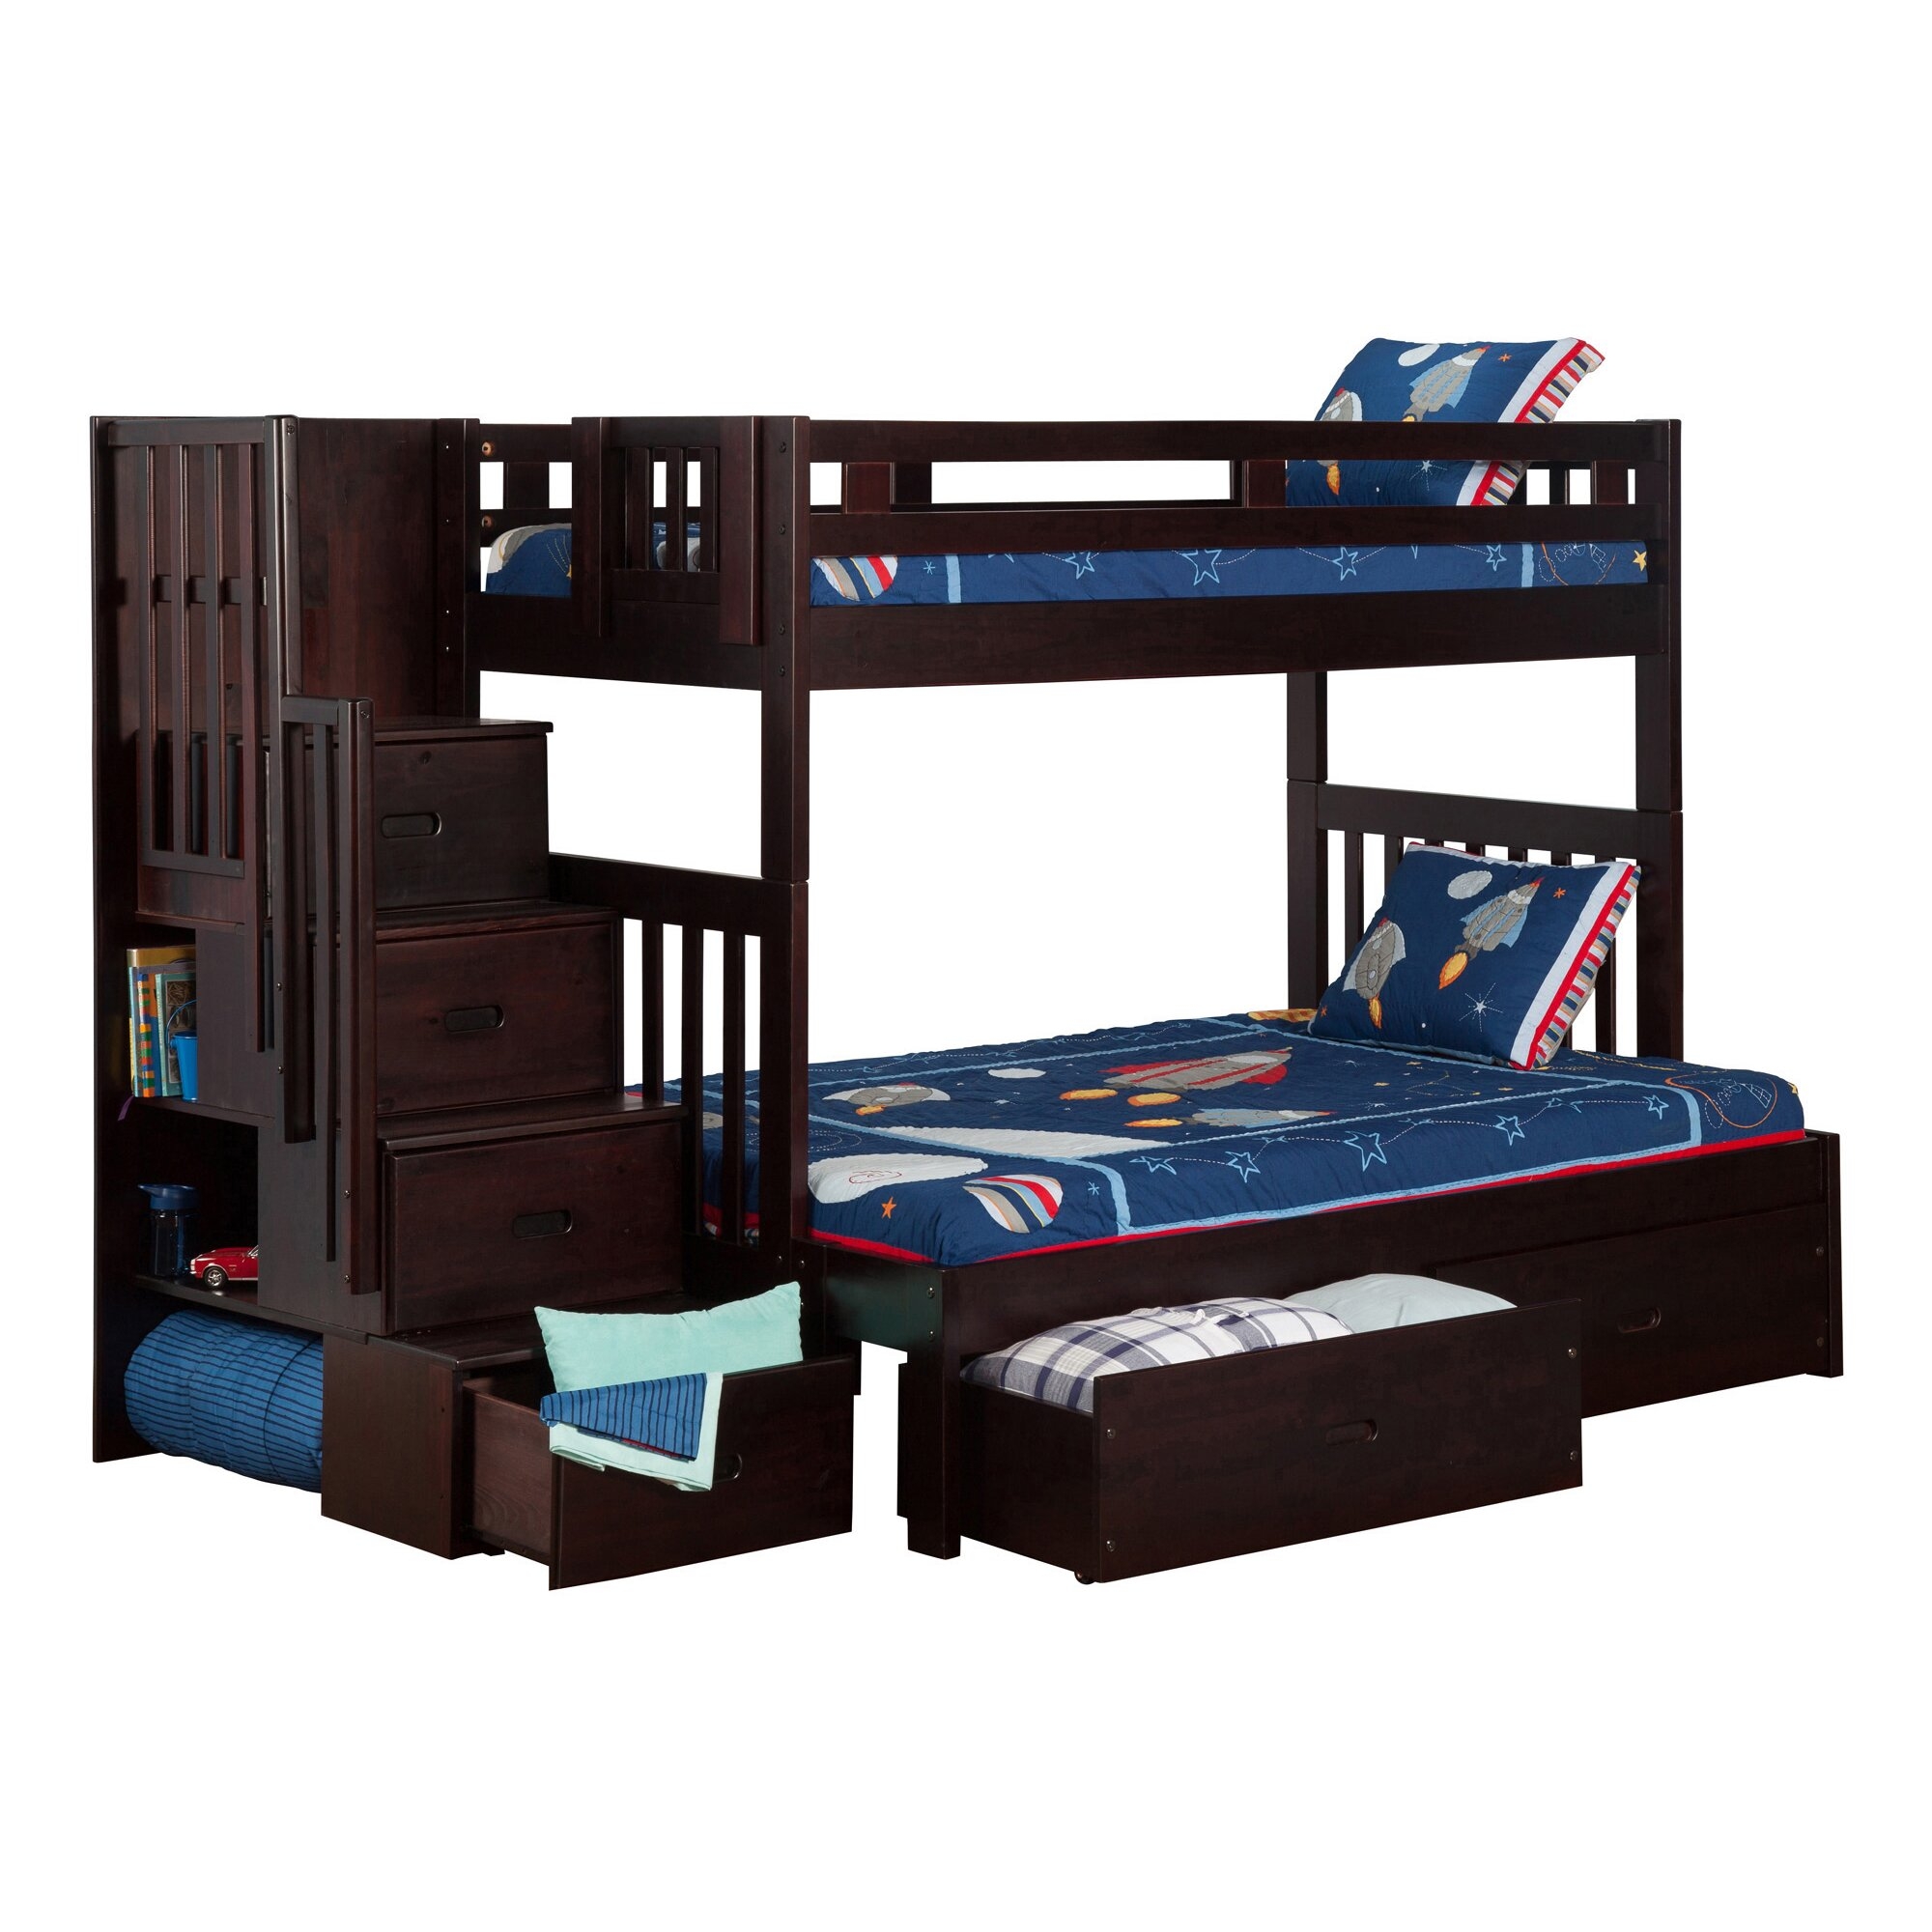 Cascade Staircase Bunk Bed Twin/Full/2 Storage Drawers